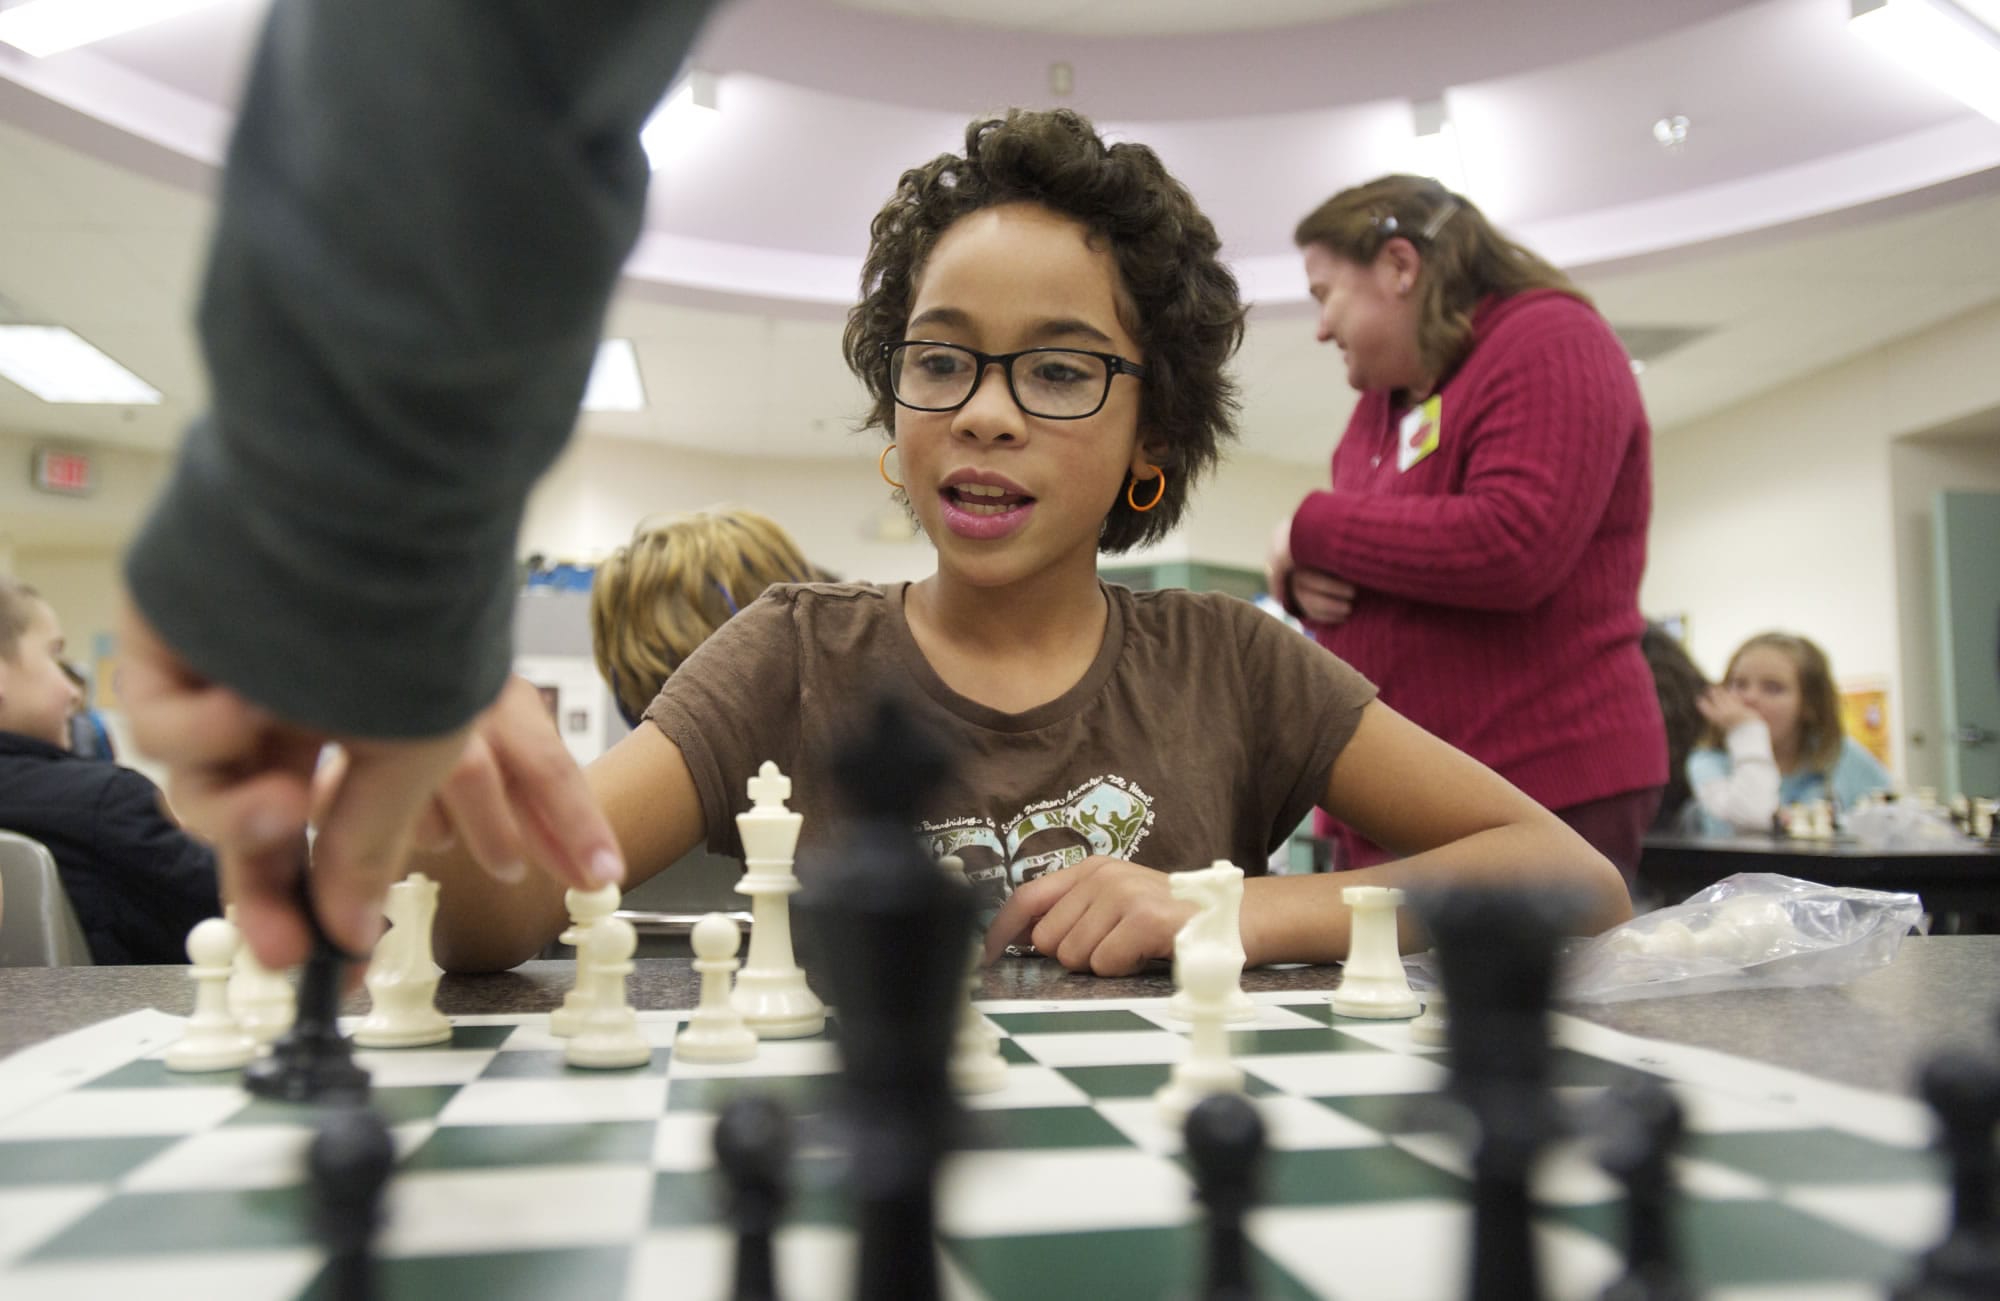 Fourth-grader Brooklyn Munoz, 10, ponders her next move while participating in an after-school chess club, one of many activities offered through Harney Elementary's family and community resource center.